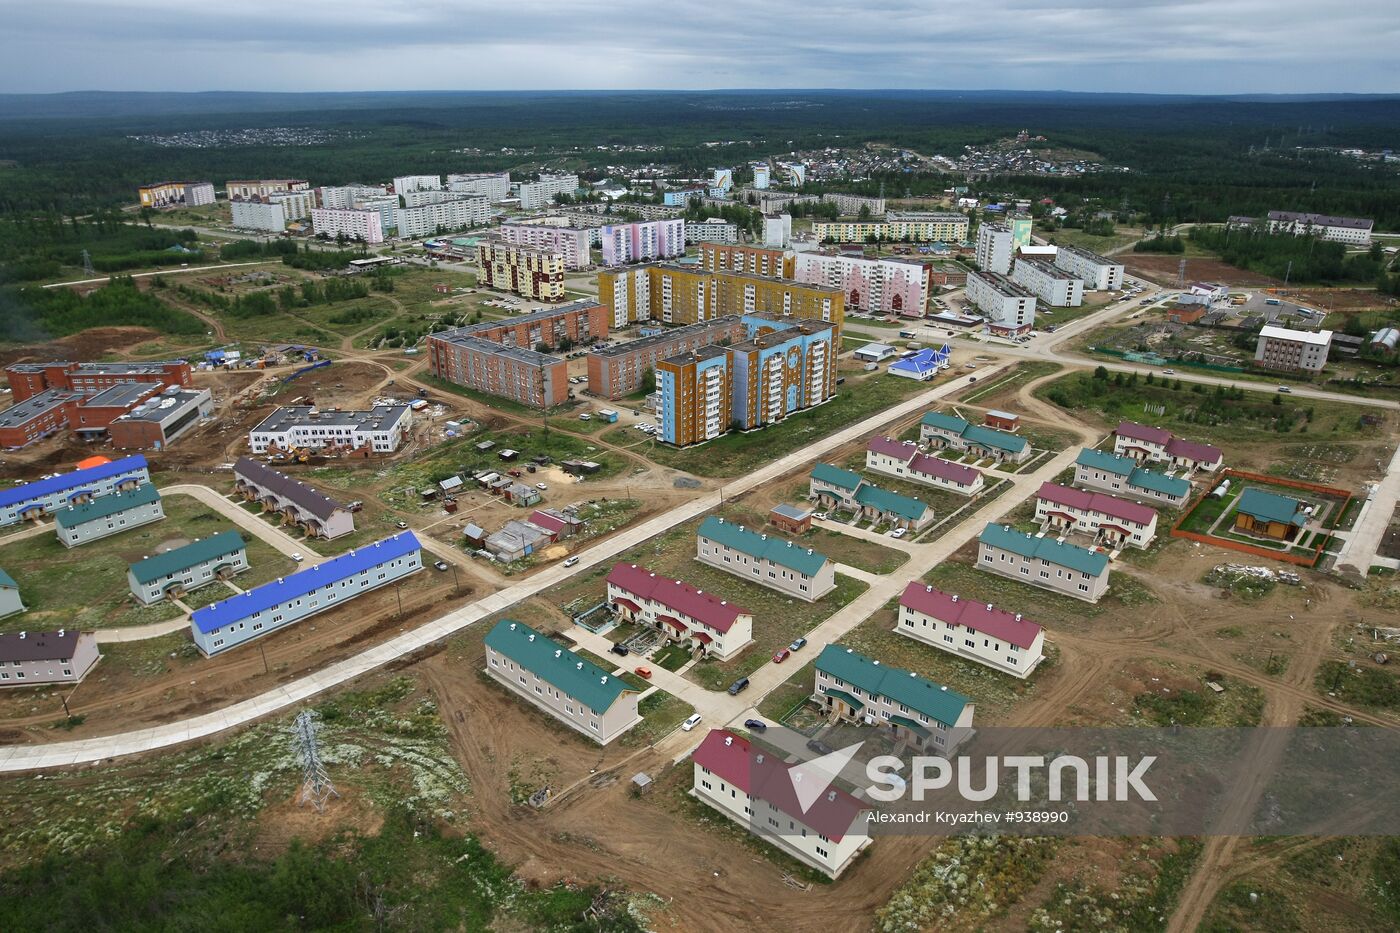 View of the town of Kodinsk